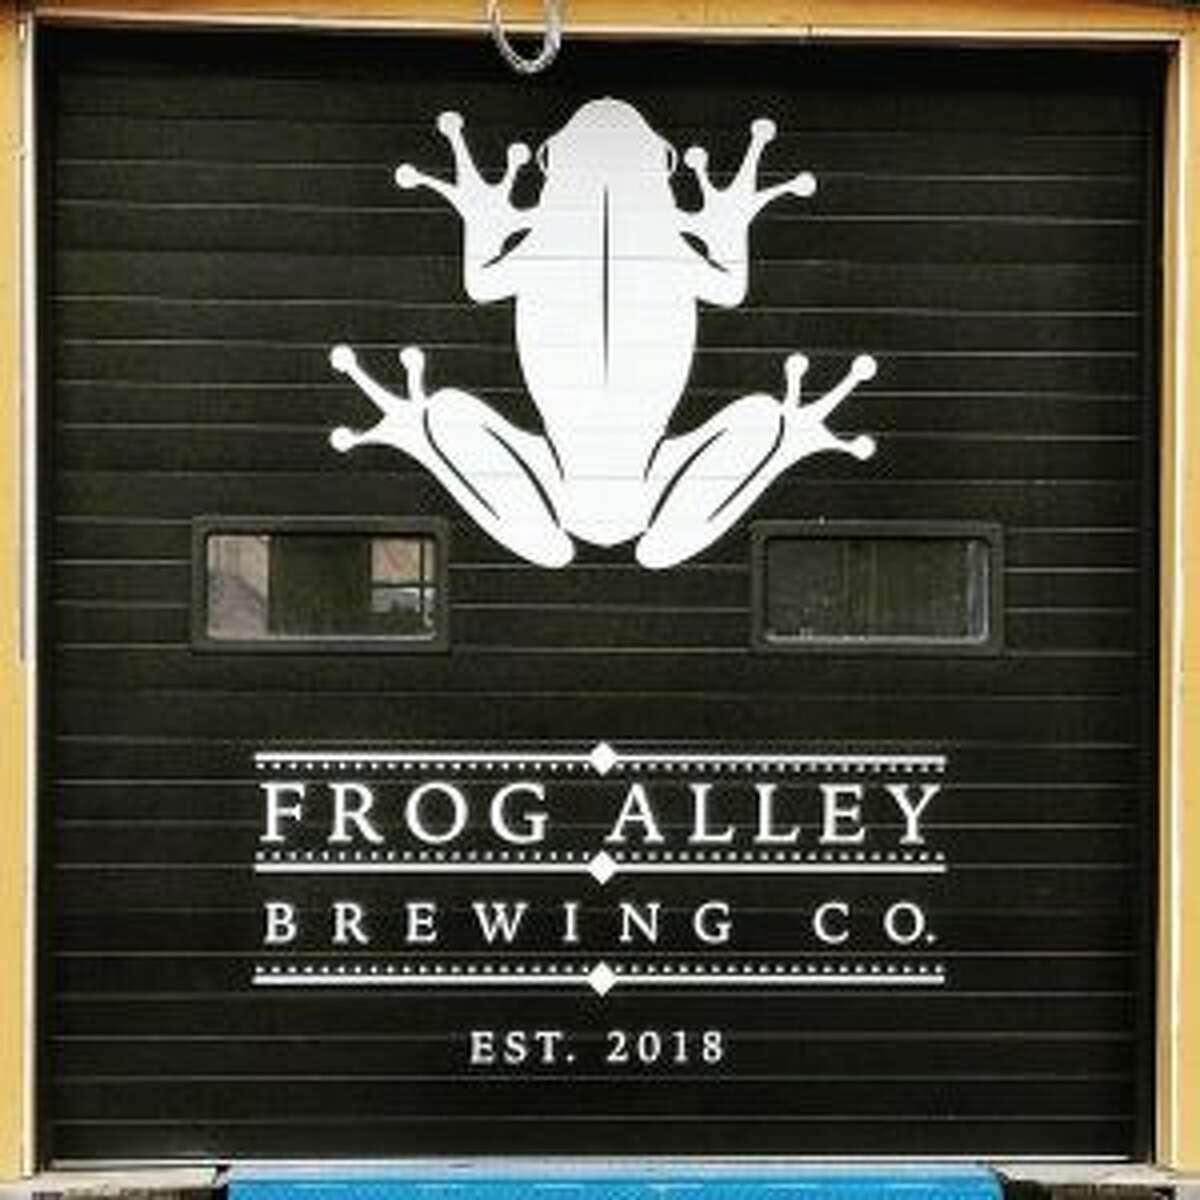 A beer company called Frog Alley Brewing is being developed to open late in 2018 as a brewery and taproom in the newly designated Mill Artisan District on State Street in downtown Schenectady.